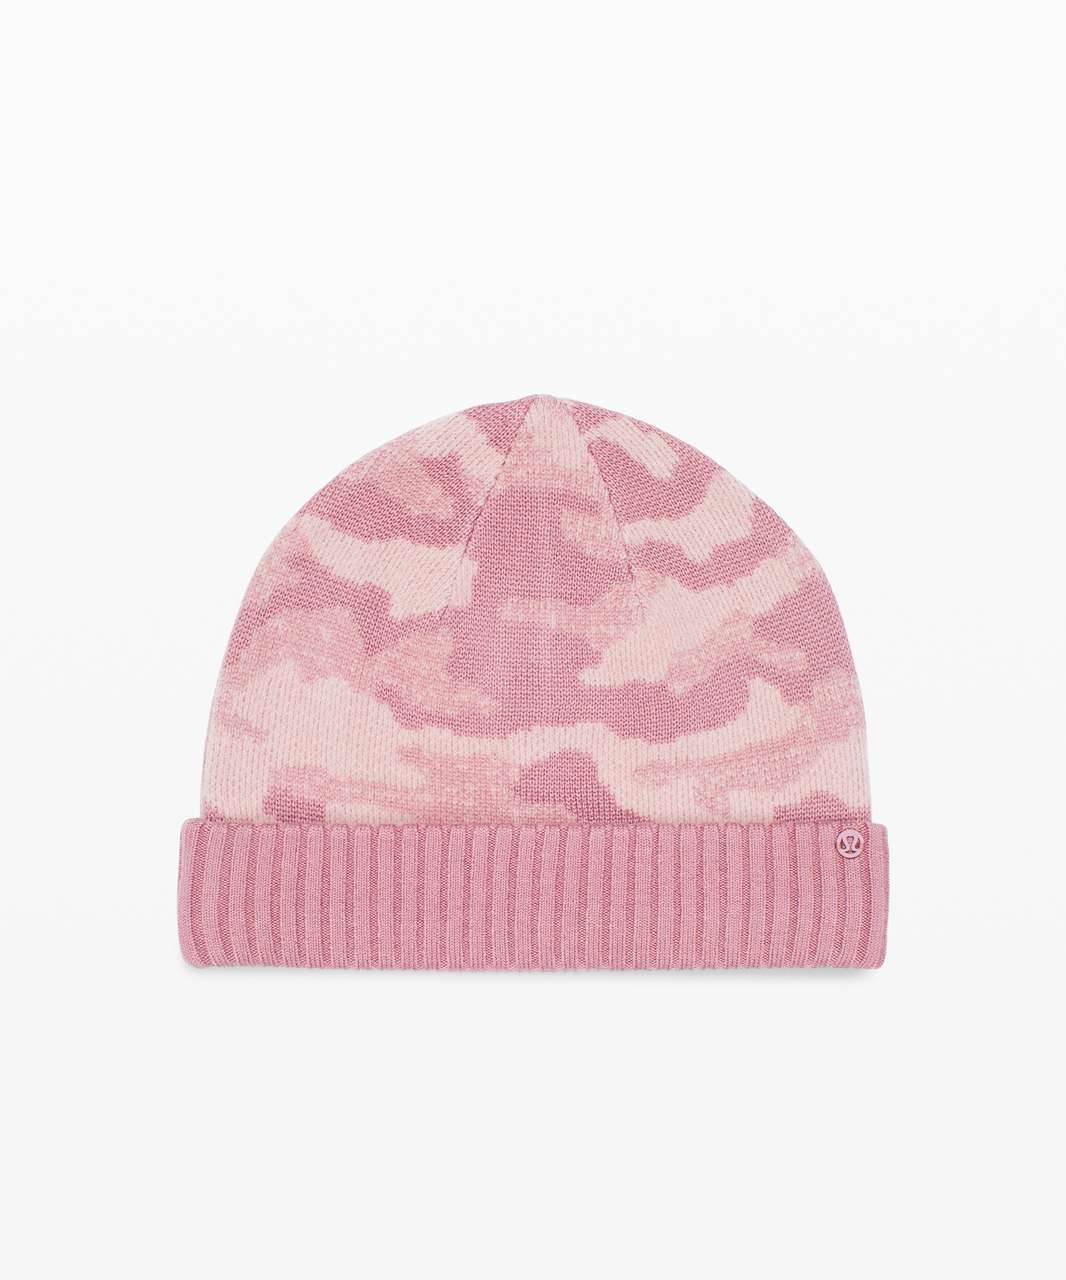 Lululemon Room for Warmth Beanie - Pink Taupe / Porcelain Pink